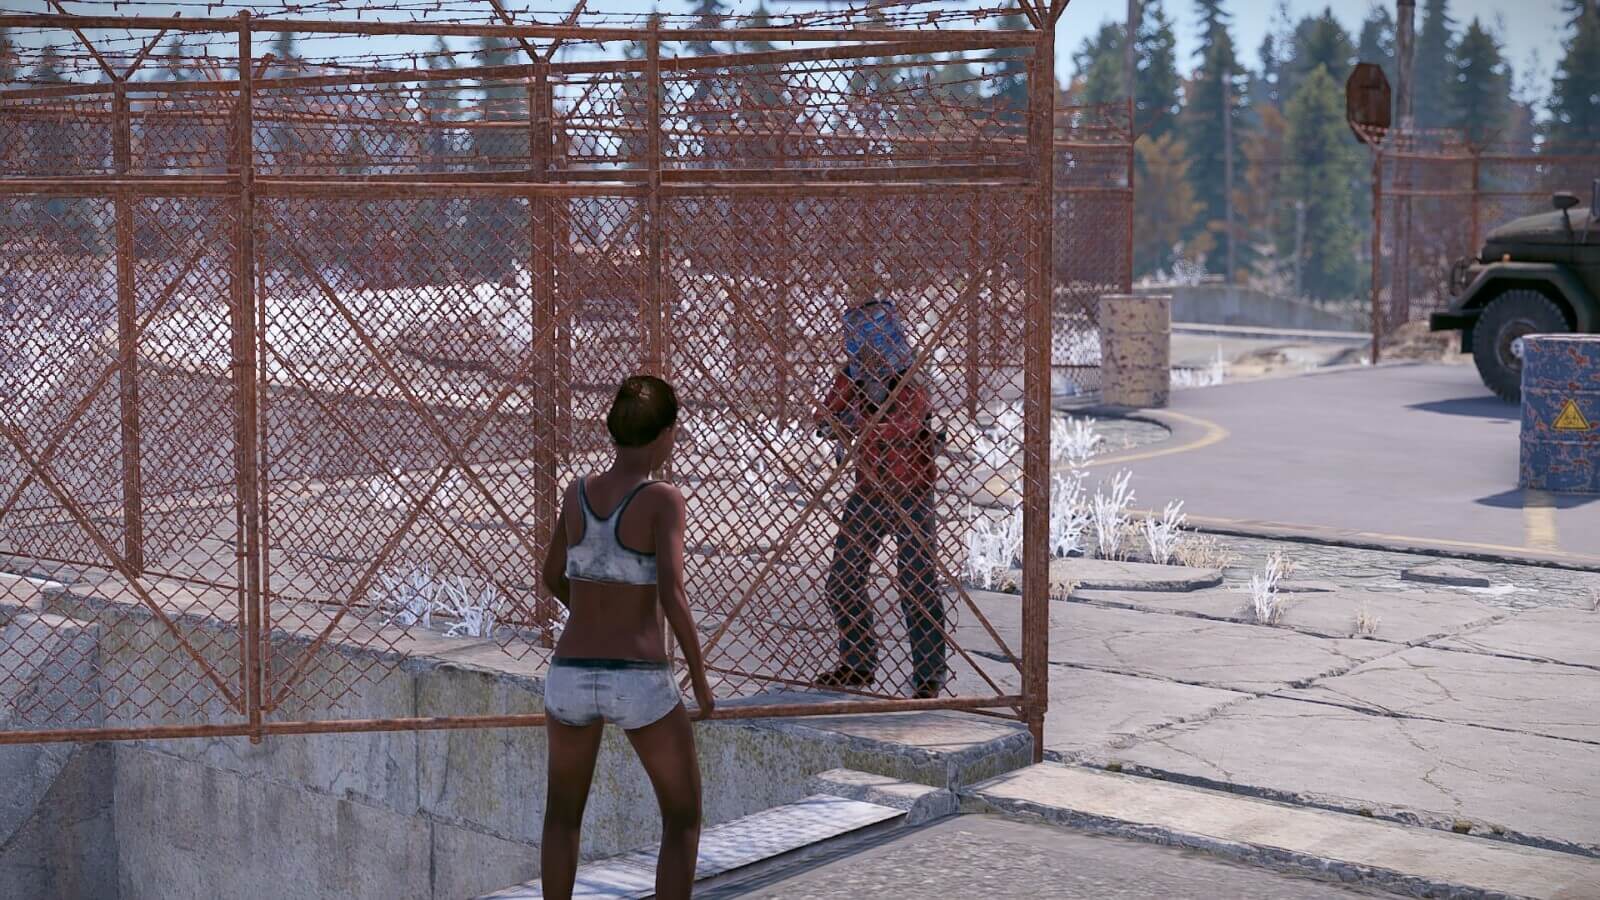 Another visual example of the fences placed at satellite dish and the fact they do not protect you against bullets.